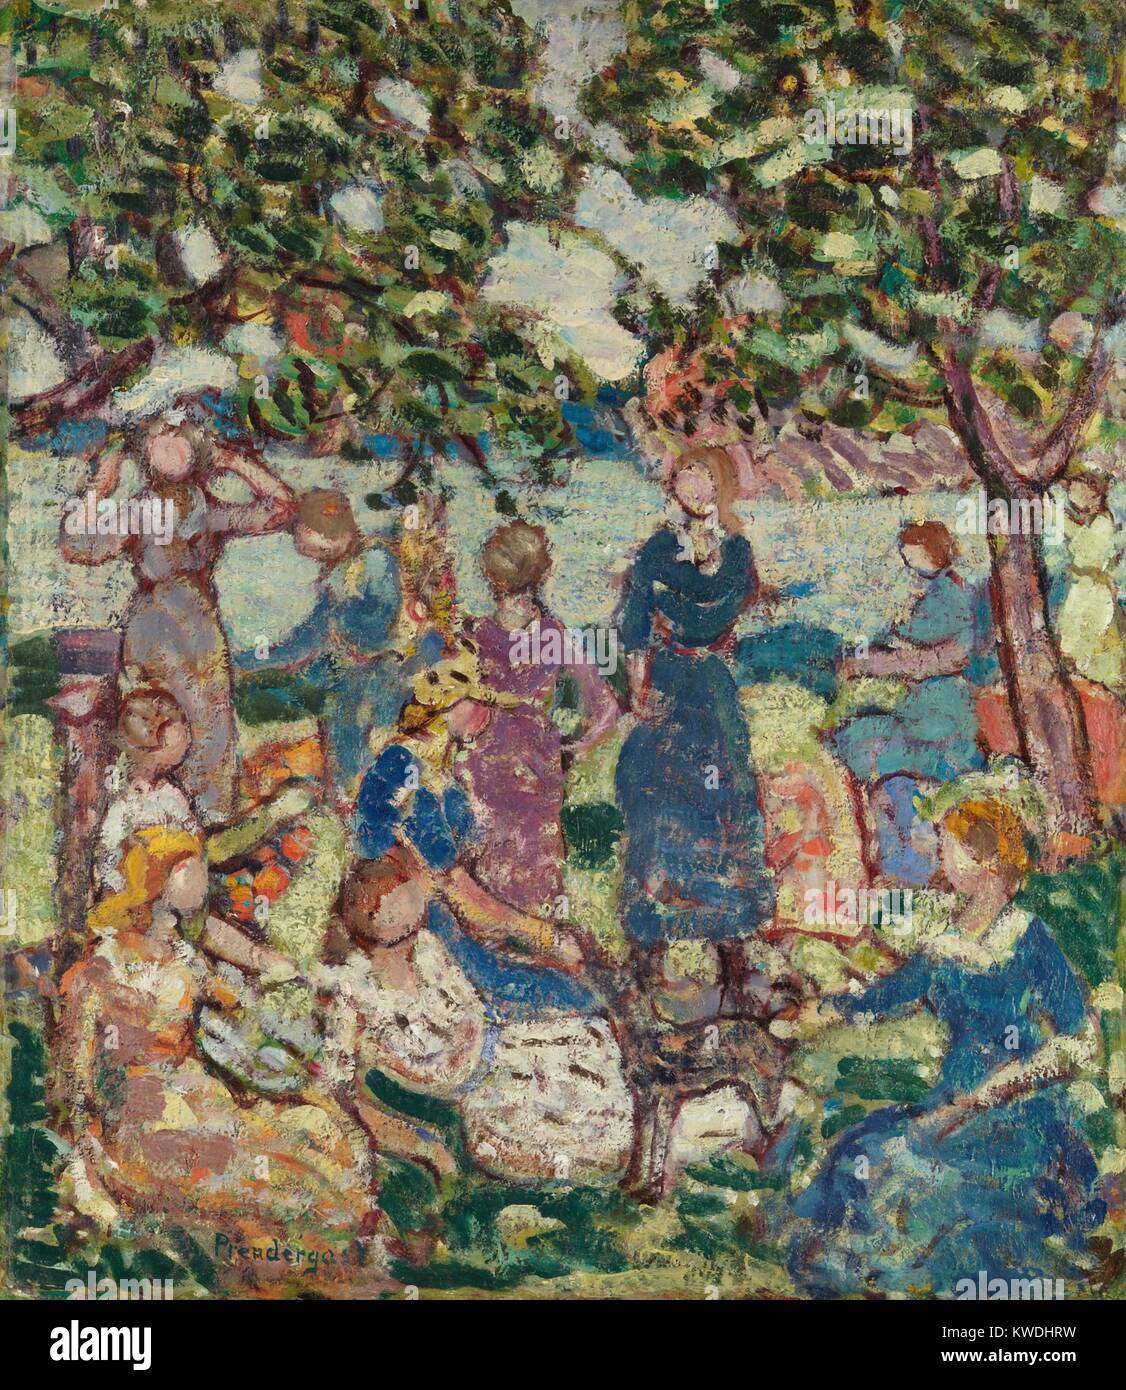 PICNIC BY THE INLET, by Maurice Brazil Prendergast, 1918-23, American painting, oil on canvas. In this late work by the artist, he returns to a favorite subject, people at the beach. It is painted in the person style he evolved from French Post Impressionism and the influence of the Nabis painters (BSLOC 2017 7 152) Stock Photo